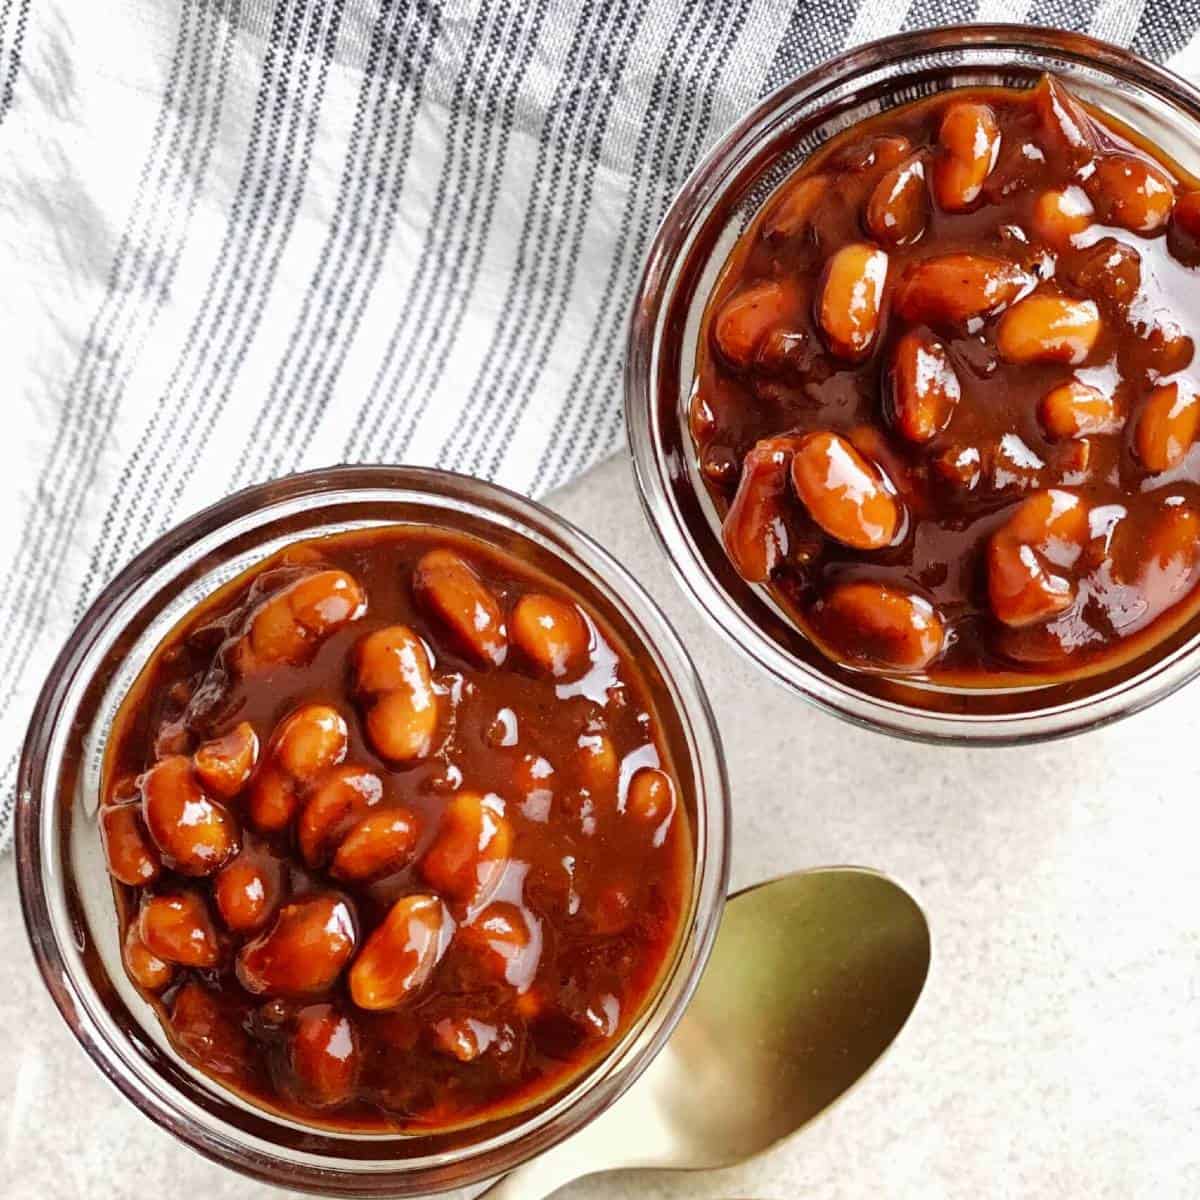 baked beans in glass bowls with a spoon.